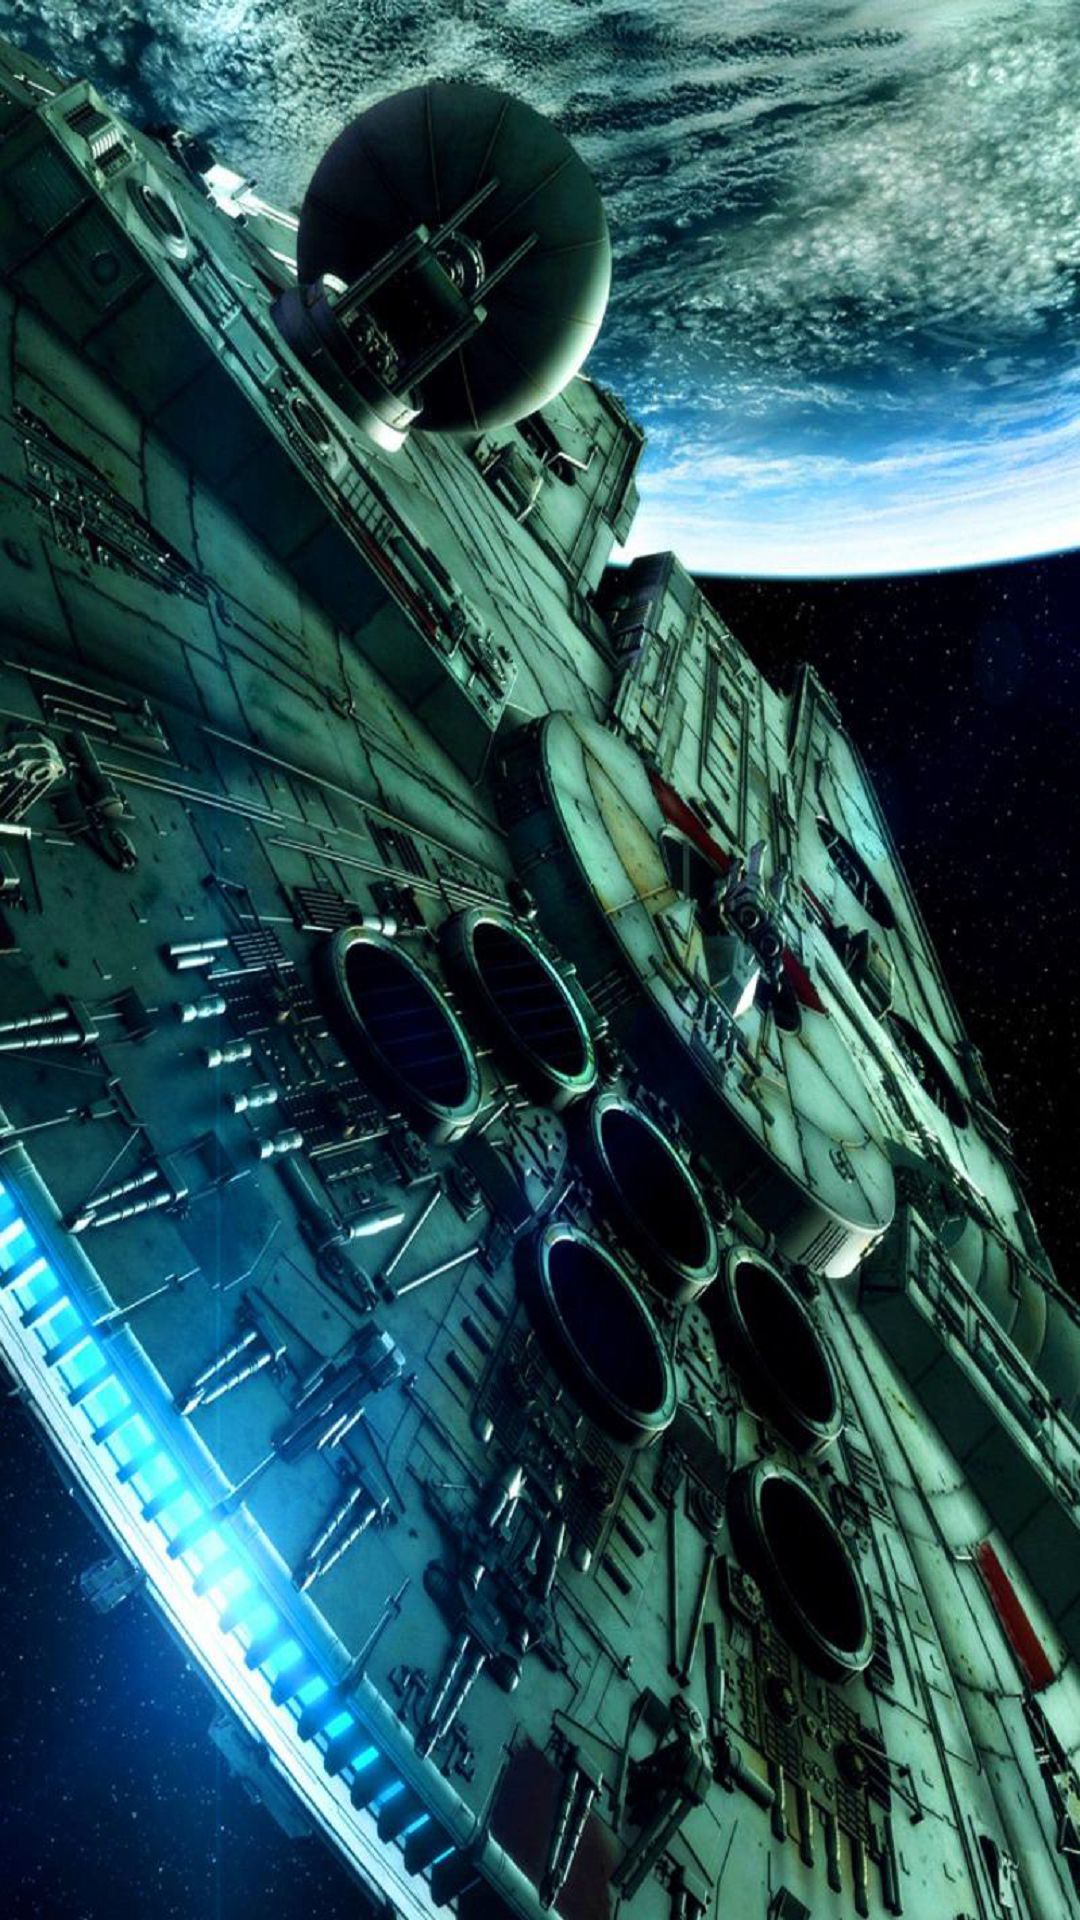 Star Wars Spaceship Science Fiction Android Wallpaper free download